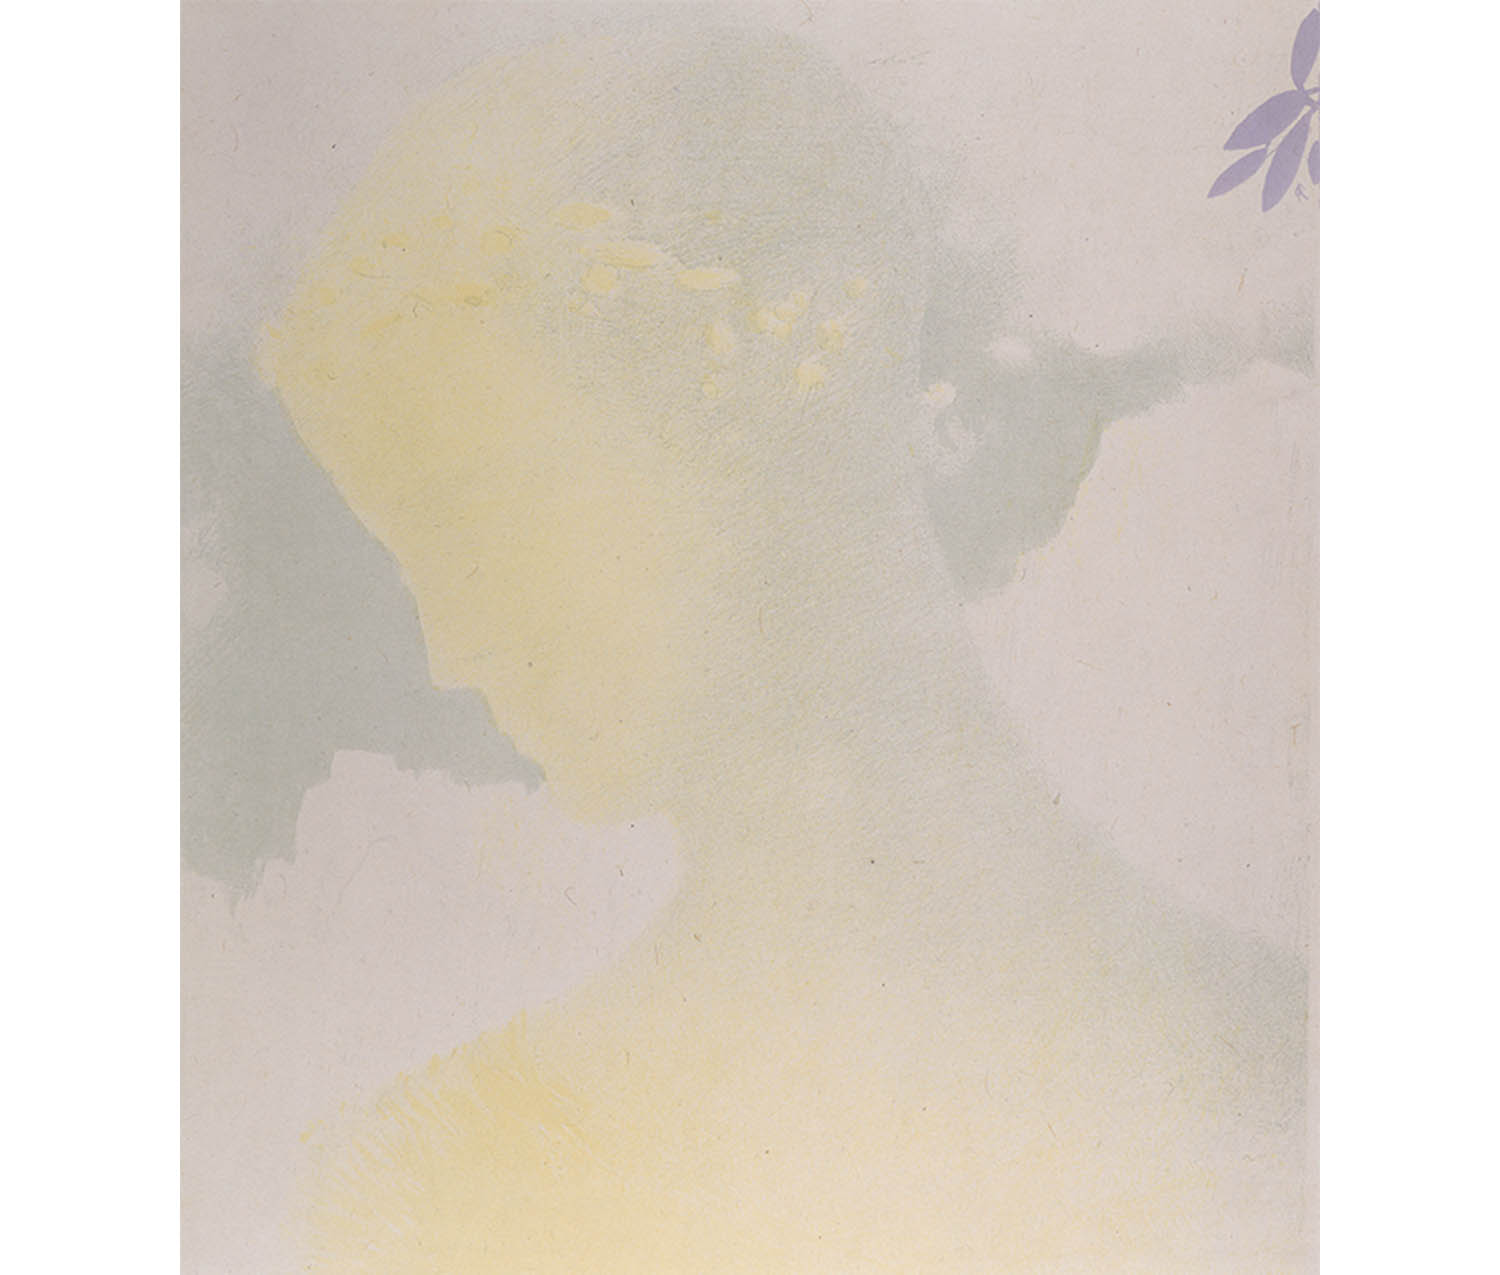 yellow and white silhouette of a woman looking over her right shoulder, against a light blue and white sky. small purple flower in top right corner.